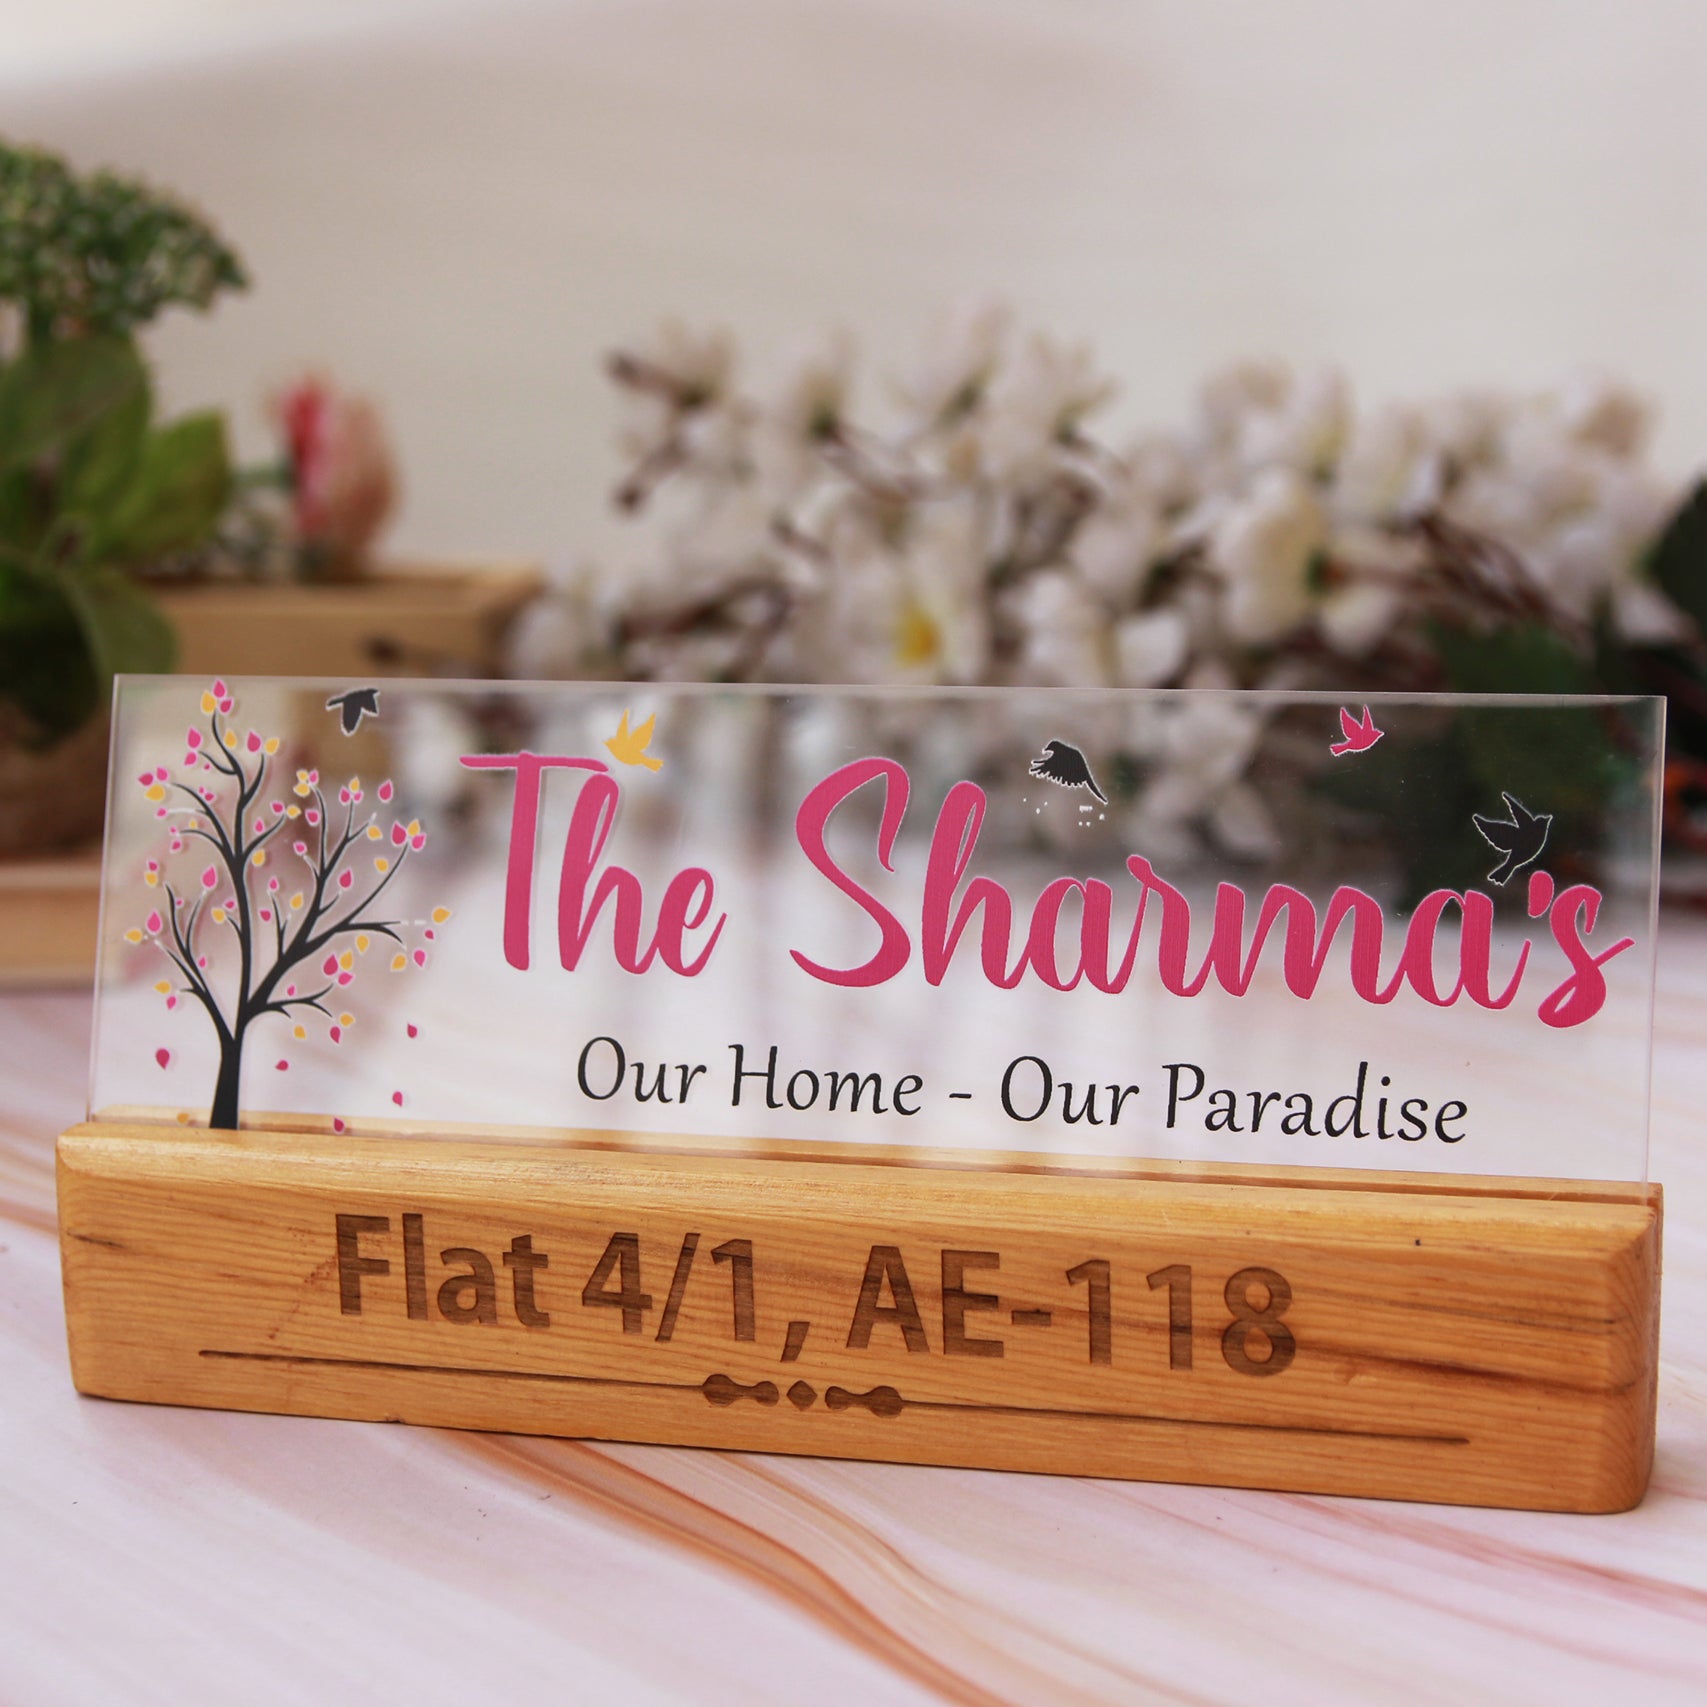 Wood Acrylic Nameplate For Home With Flat Number & Address